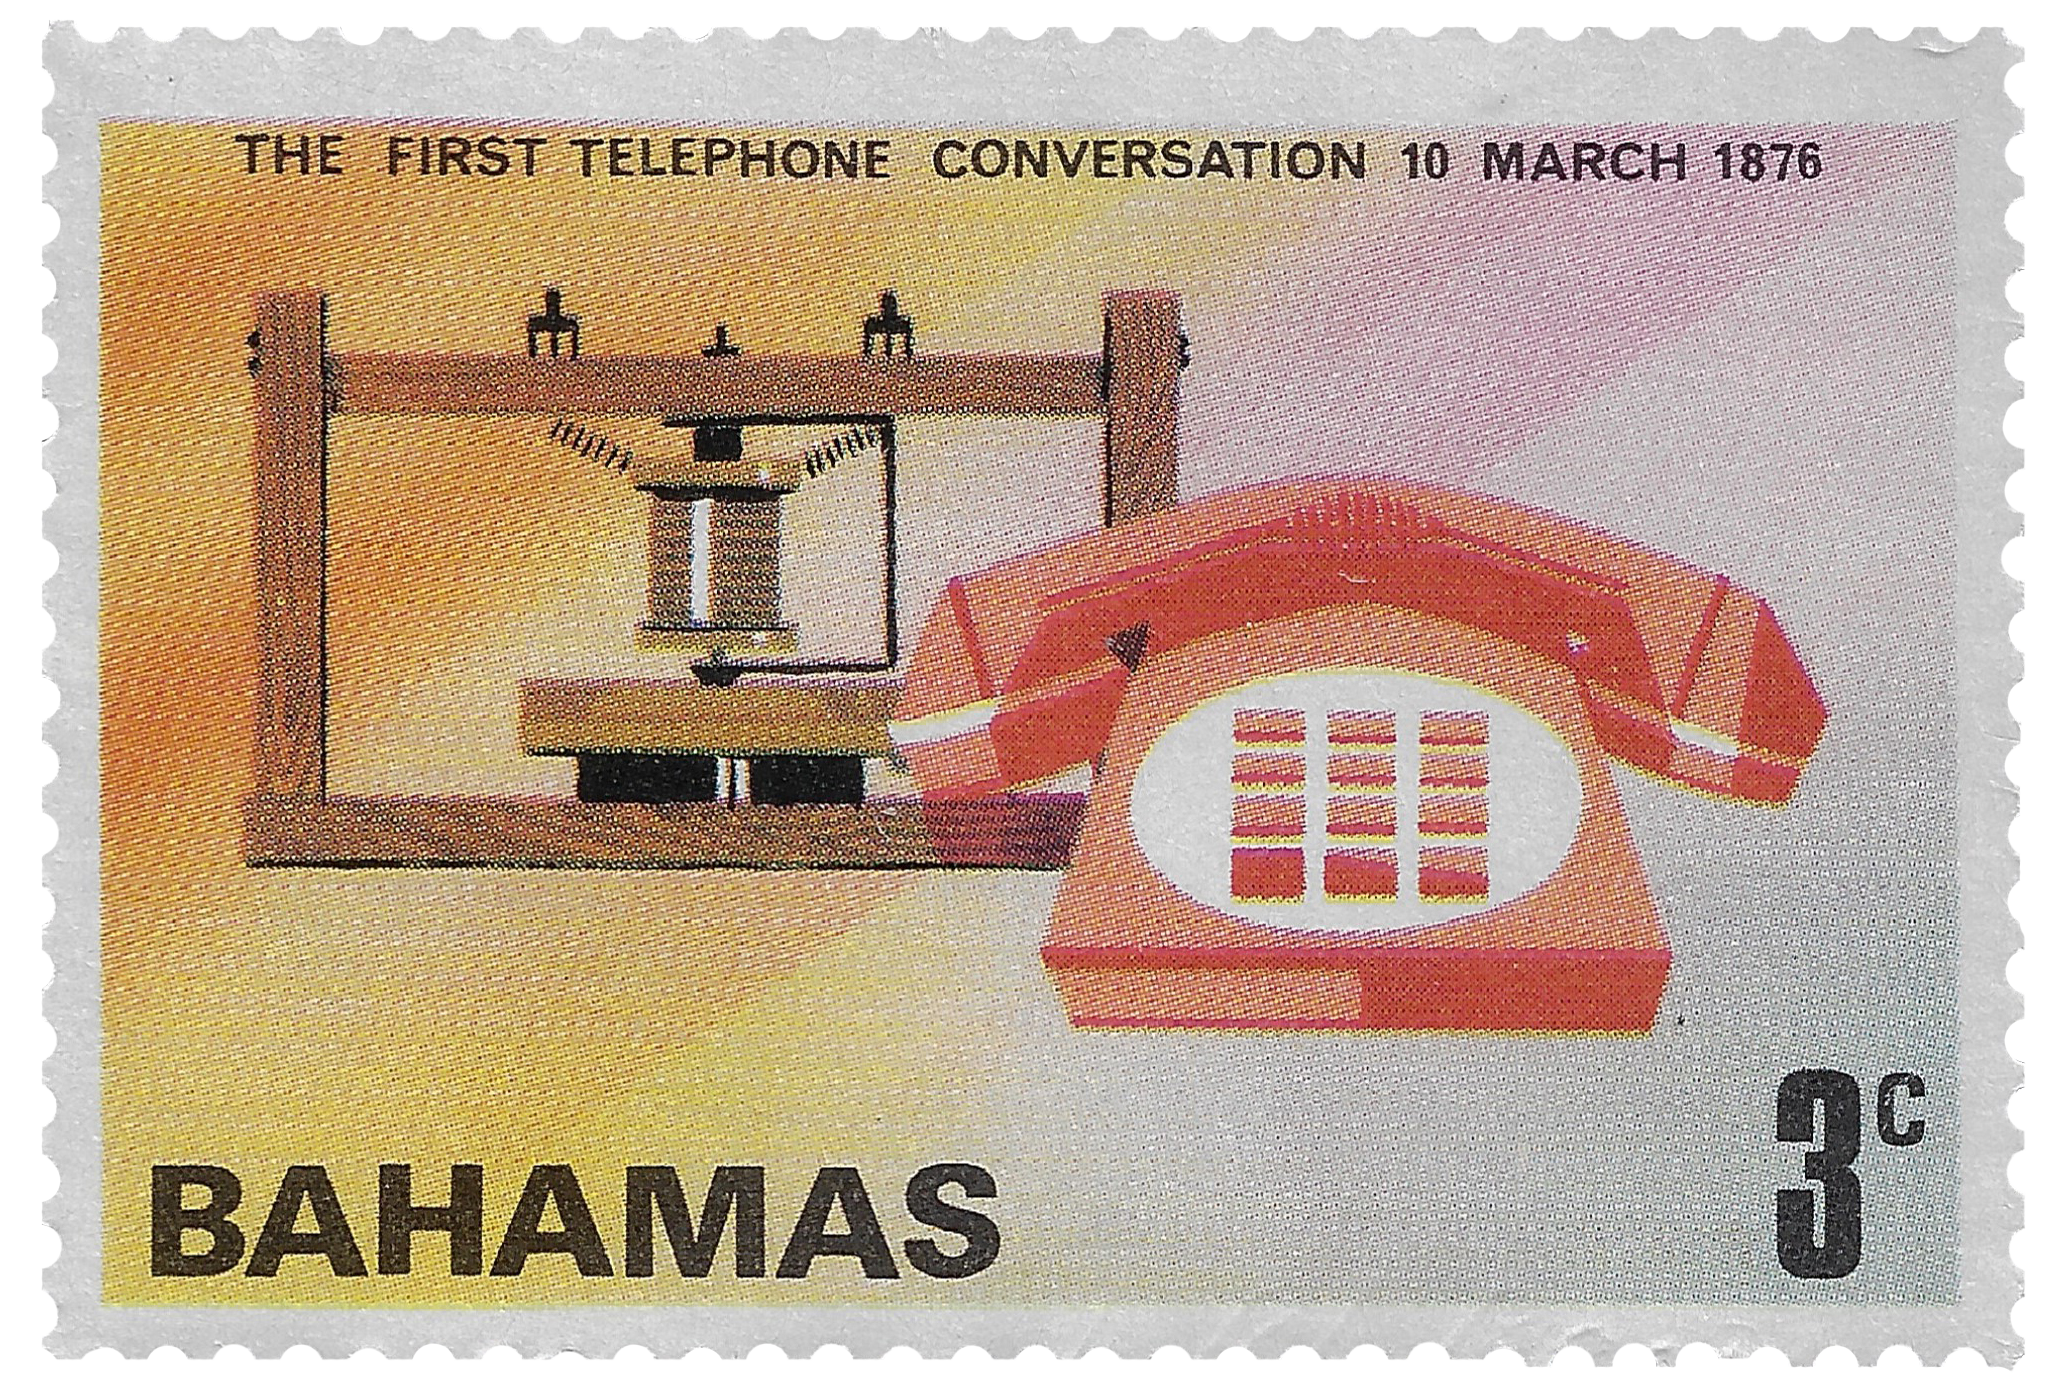 3c 1976, The First Telephone Conversation, 10 March 1876